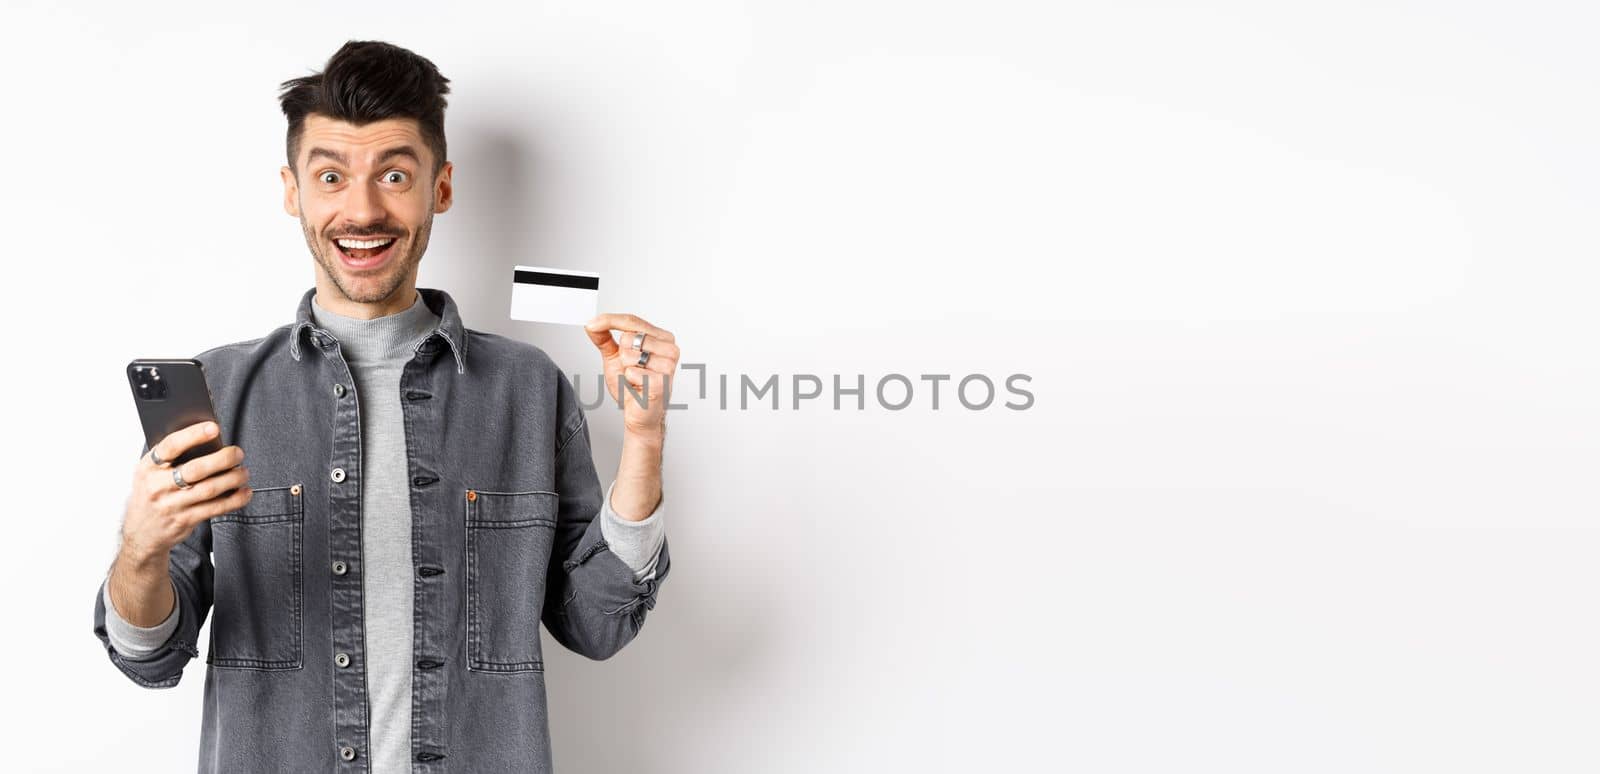 Online shopping concept. Excited man making purchase in internet, easy buying with plastic credit card and smartphone, smiling happy at camera, white background.